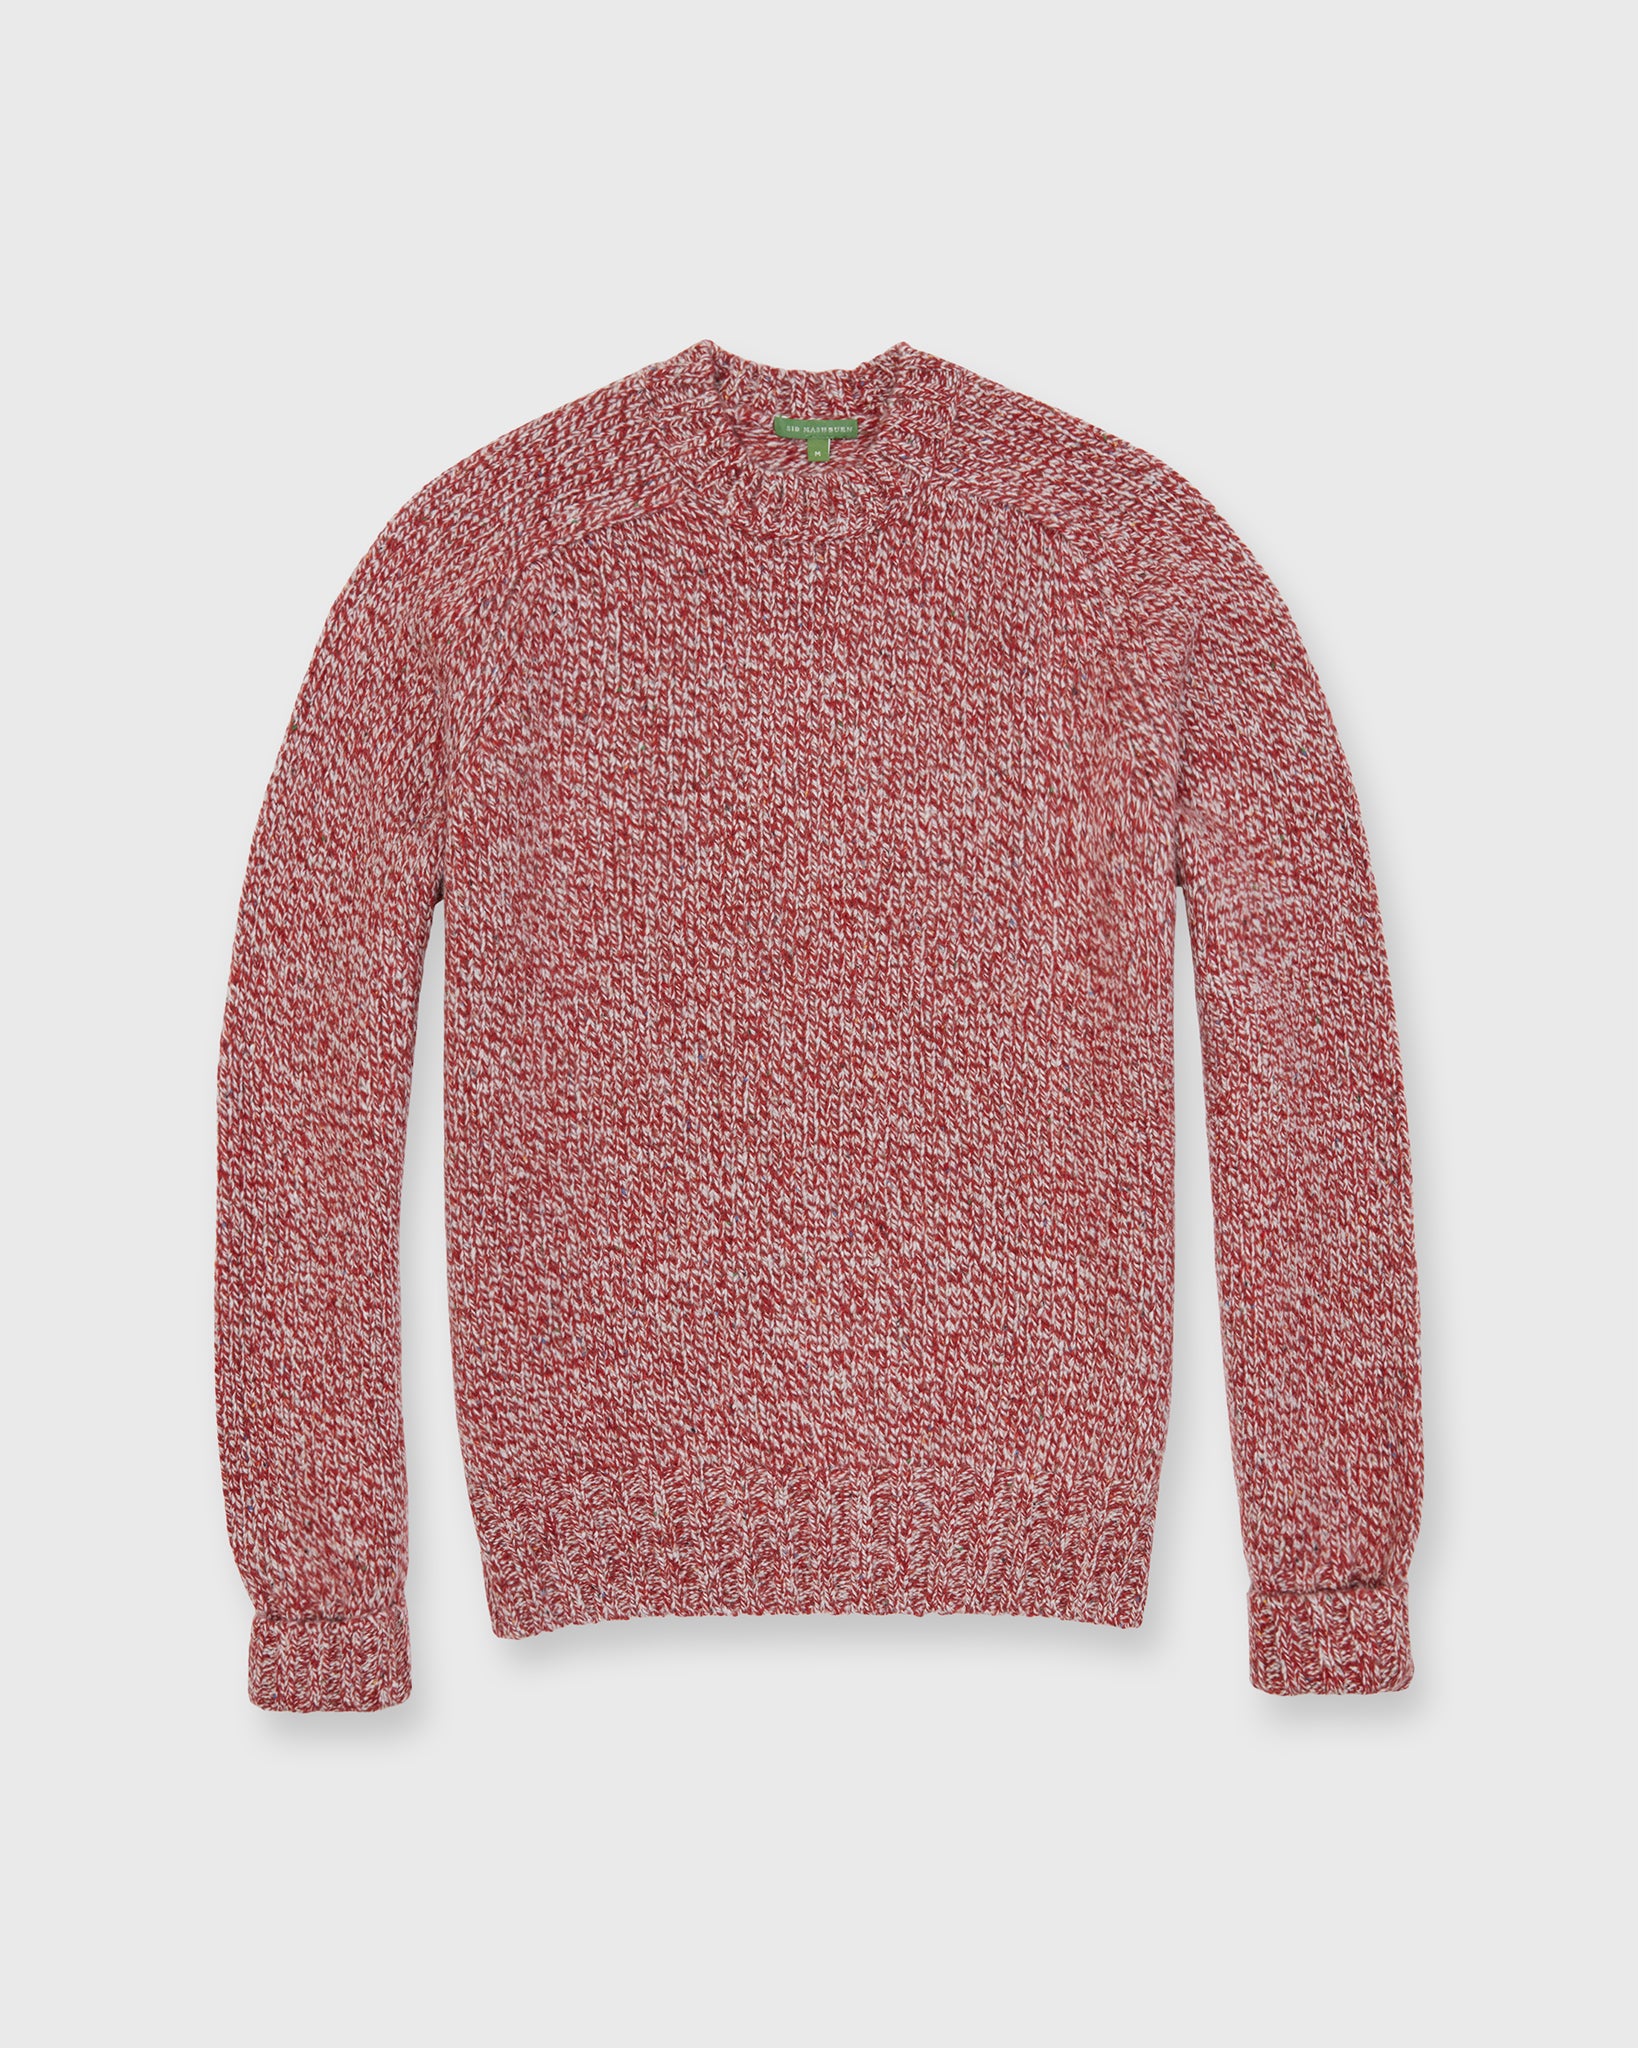 Off-Gauge Rag Sweater in Red/Ivory Donegal Wool Blend